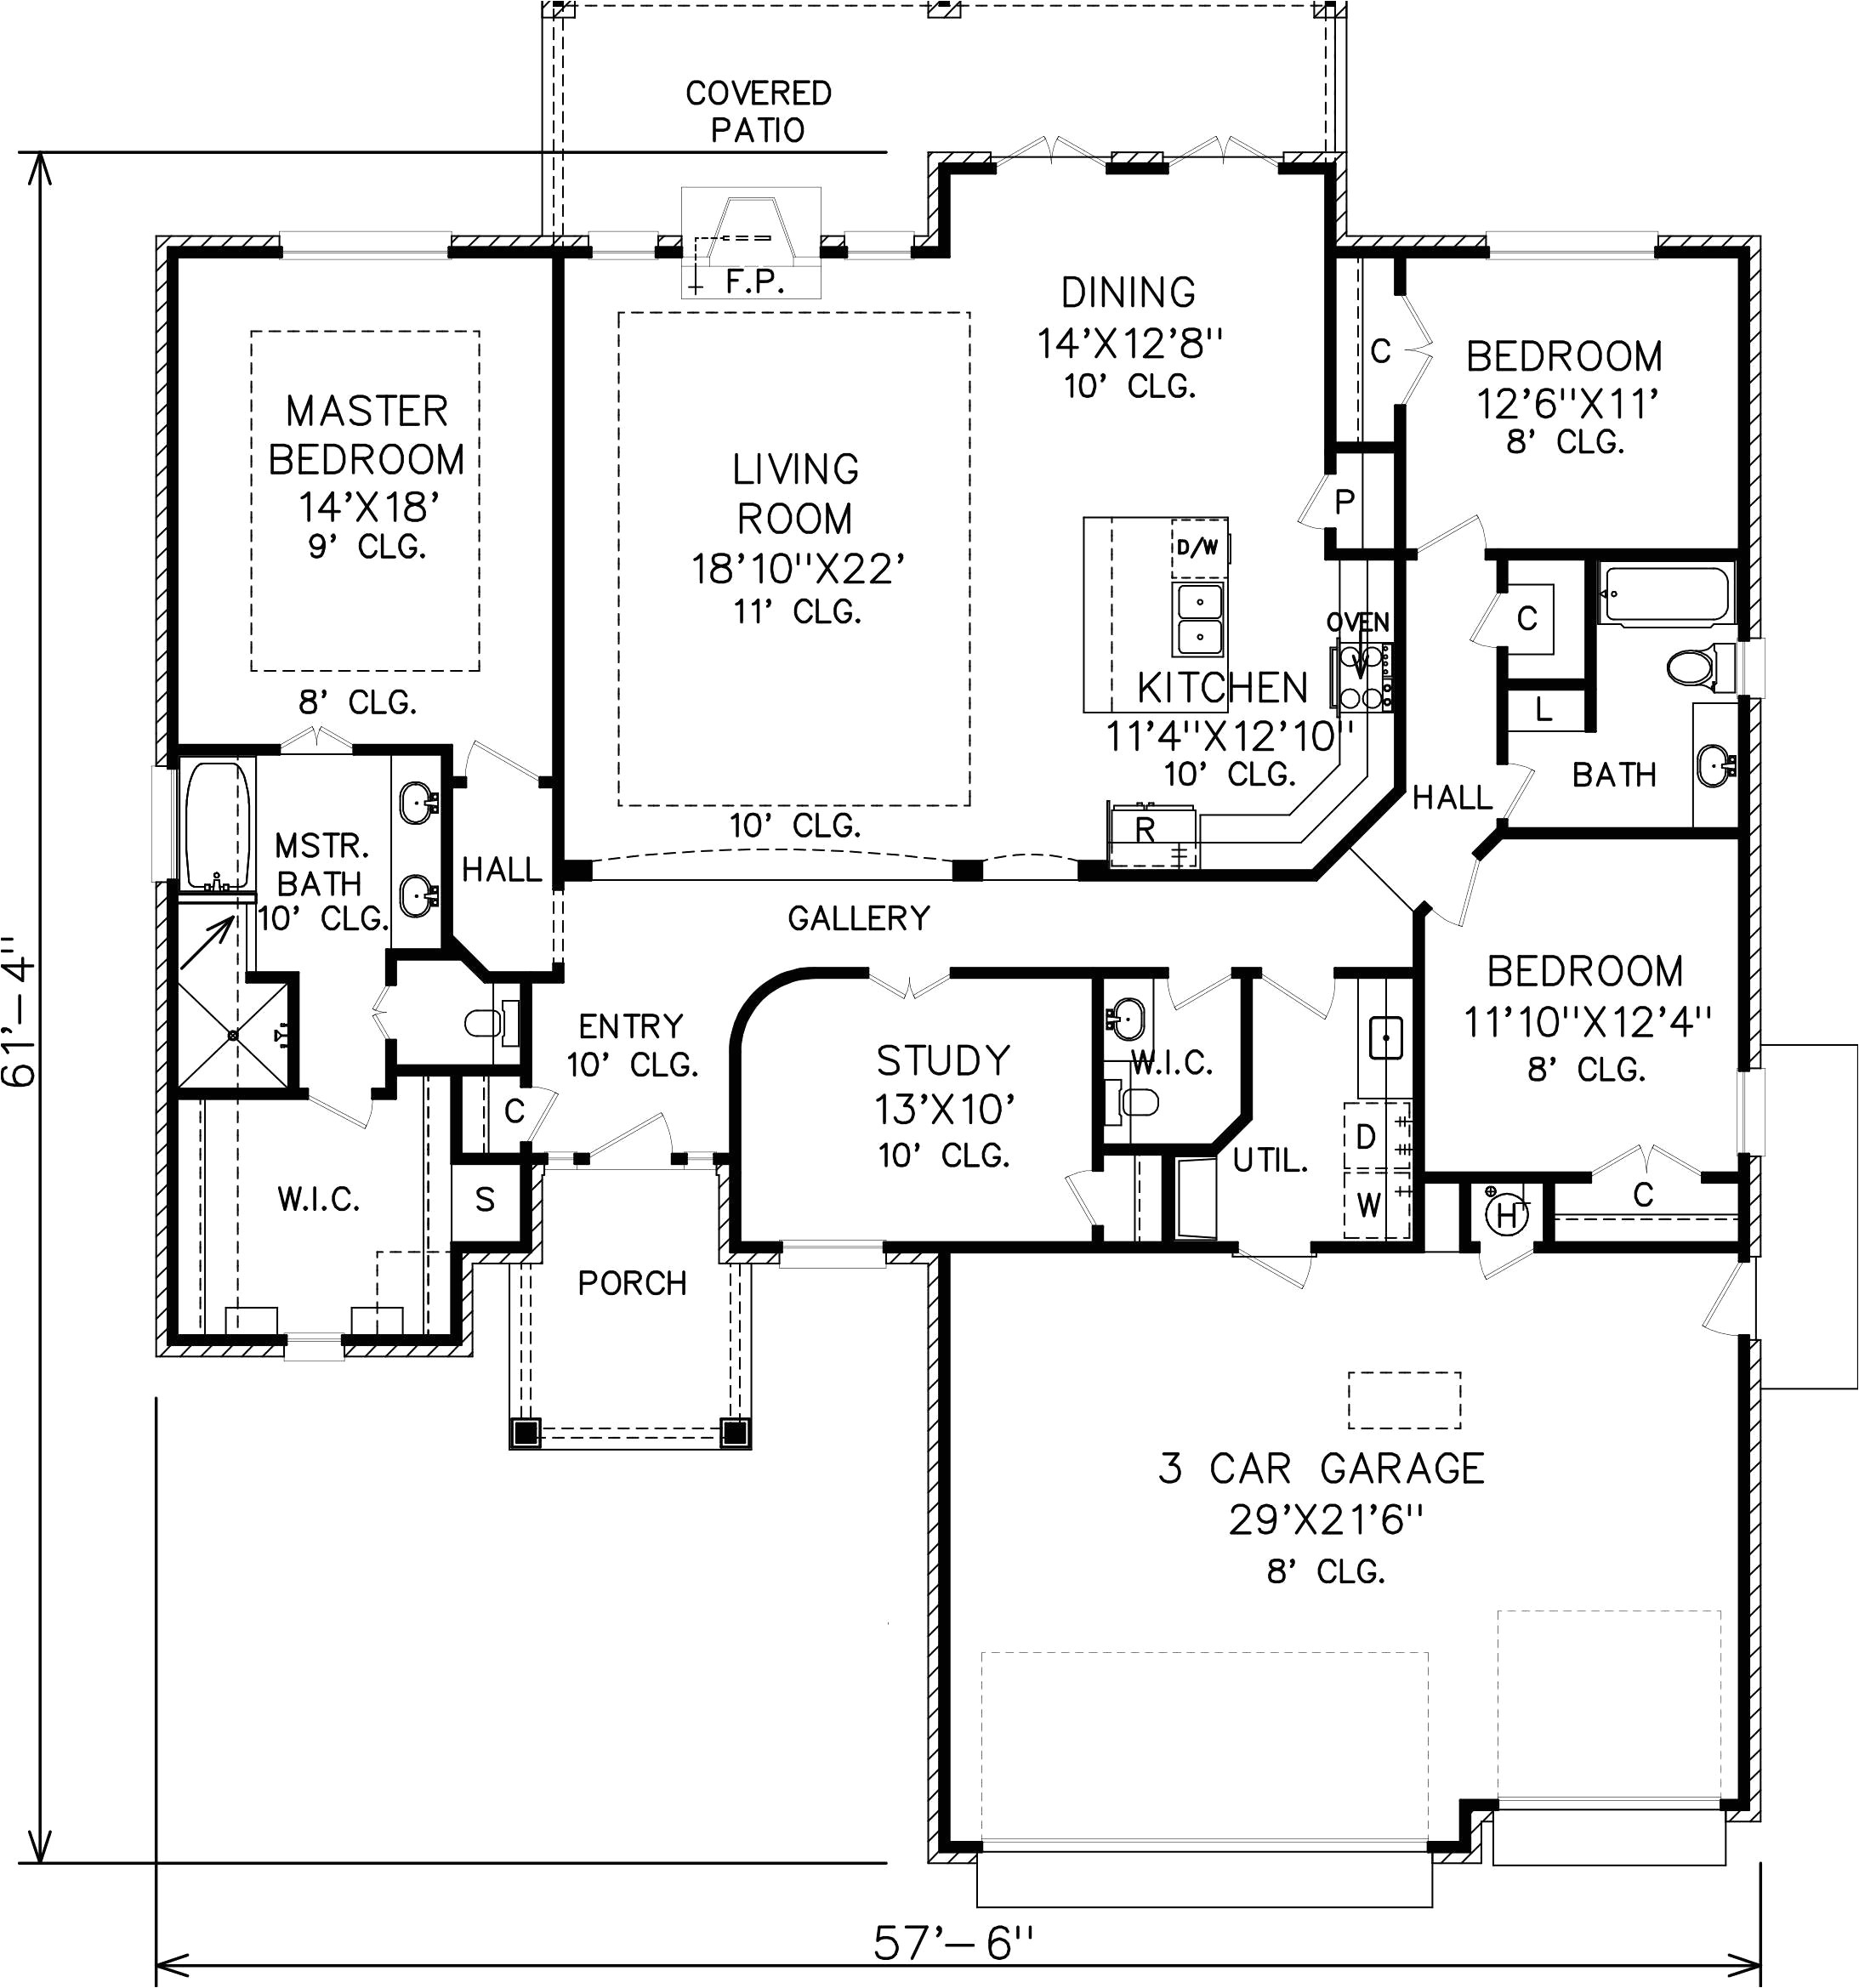 16x20 floor plan unique floor plan for a house awesome designs design plan 0d house and